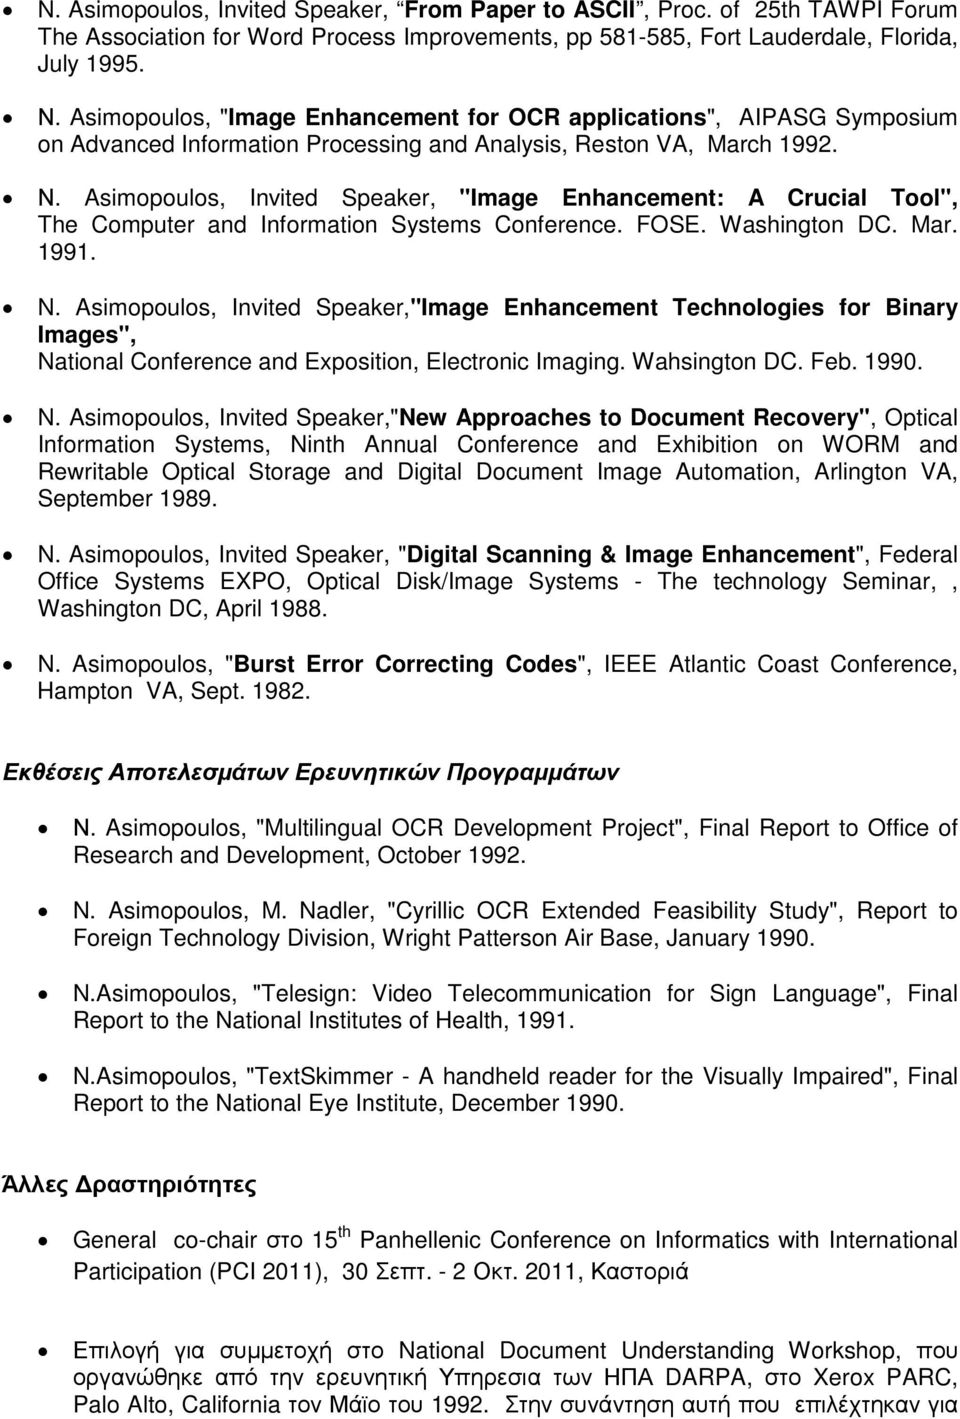 Asimopoulos, Invited Speaker, "Image Enhancement: A Crucial Tool", The Computer and Information Systems Conference. FOSE. Washington DC. Mar. 1991. N.